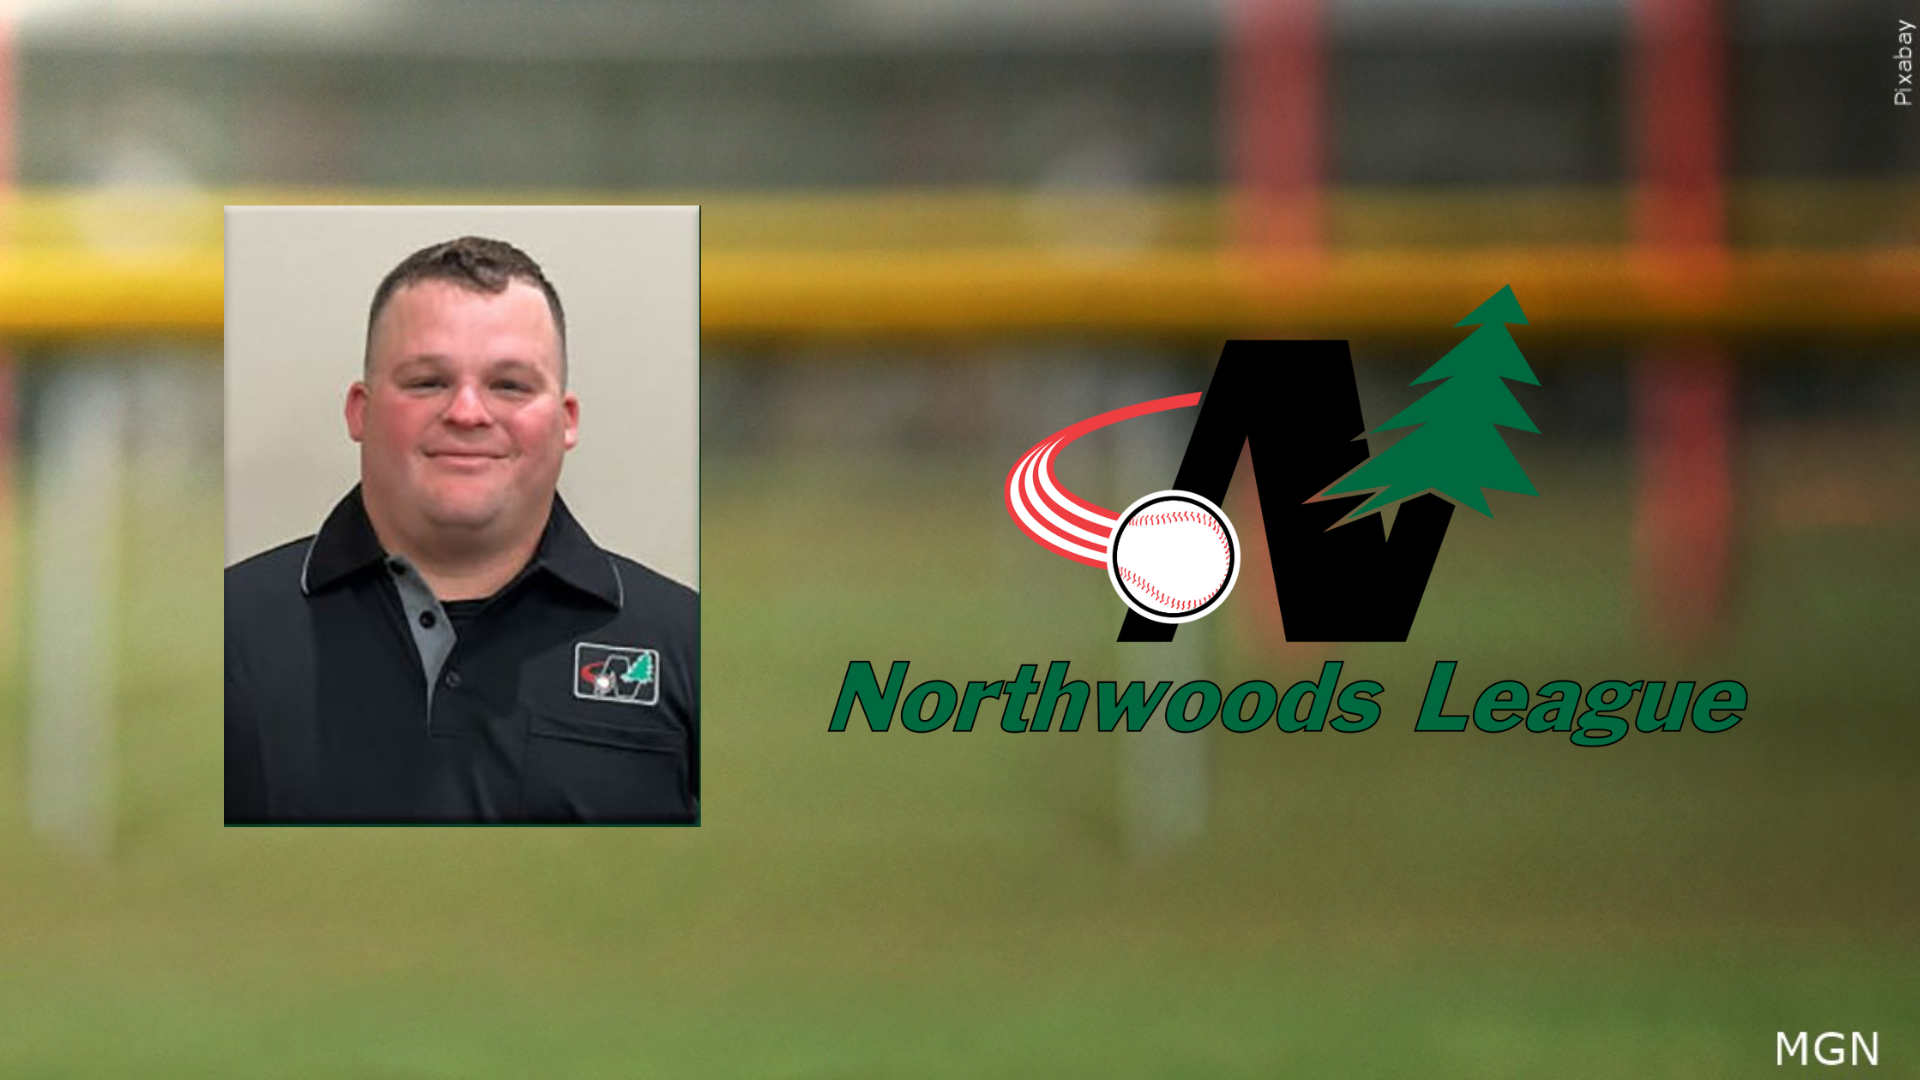 Northwoods League Names All-MLB Alumni Team for Pitchers